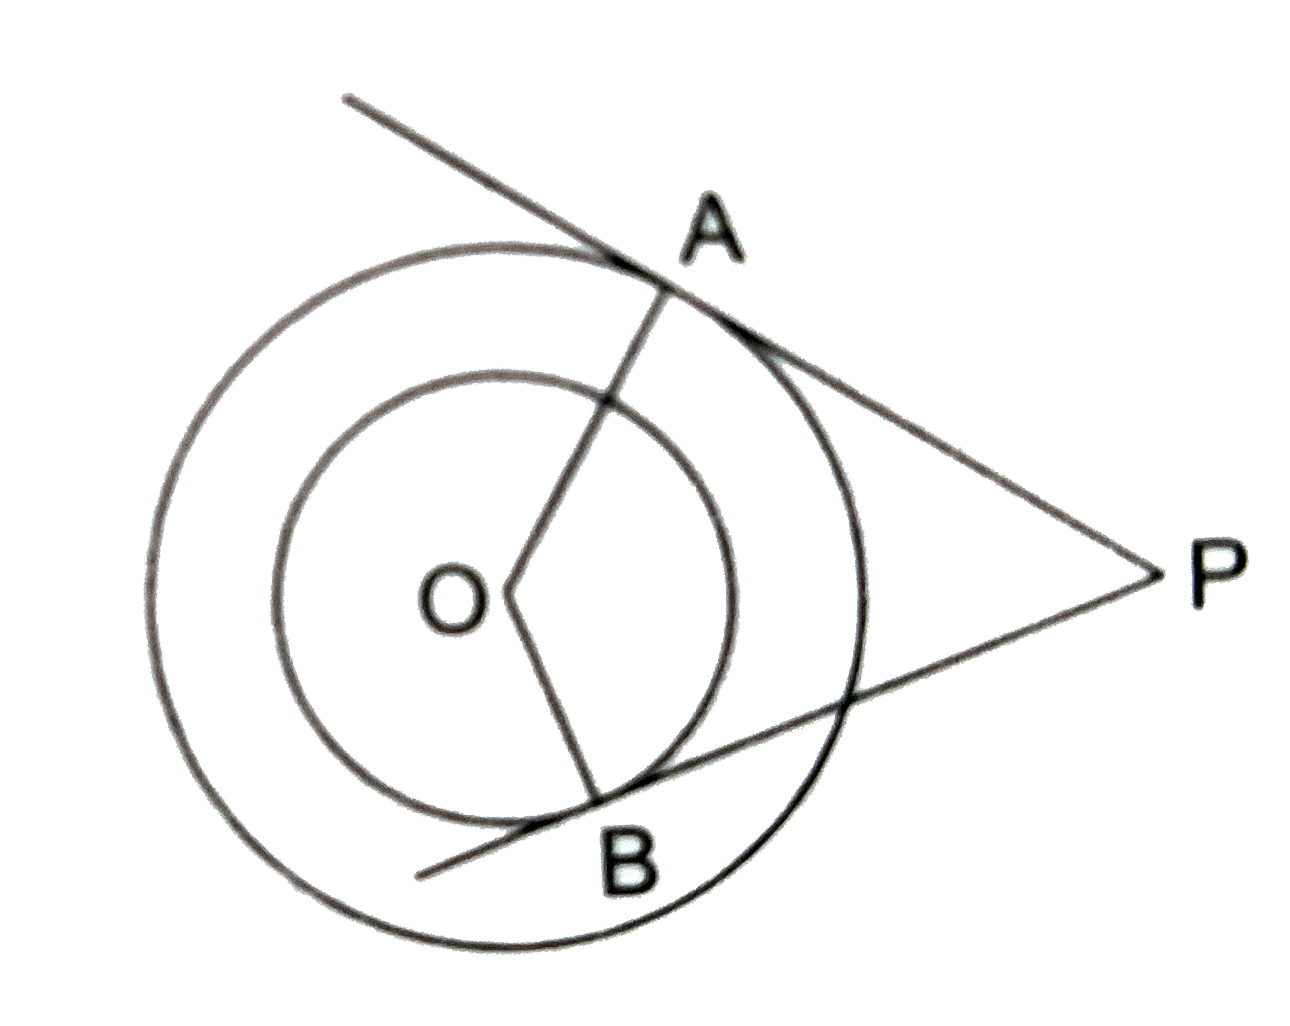 Tangents PA and PB are drawn from an external point P to two concentric circles with centre O and radii 8cm and 5cm respectively, as shown in the figure. If AP=15cm then find the length of BP.